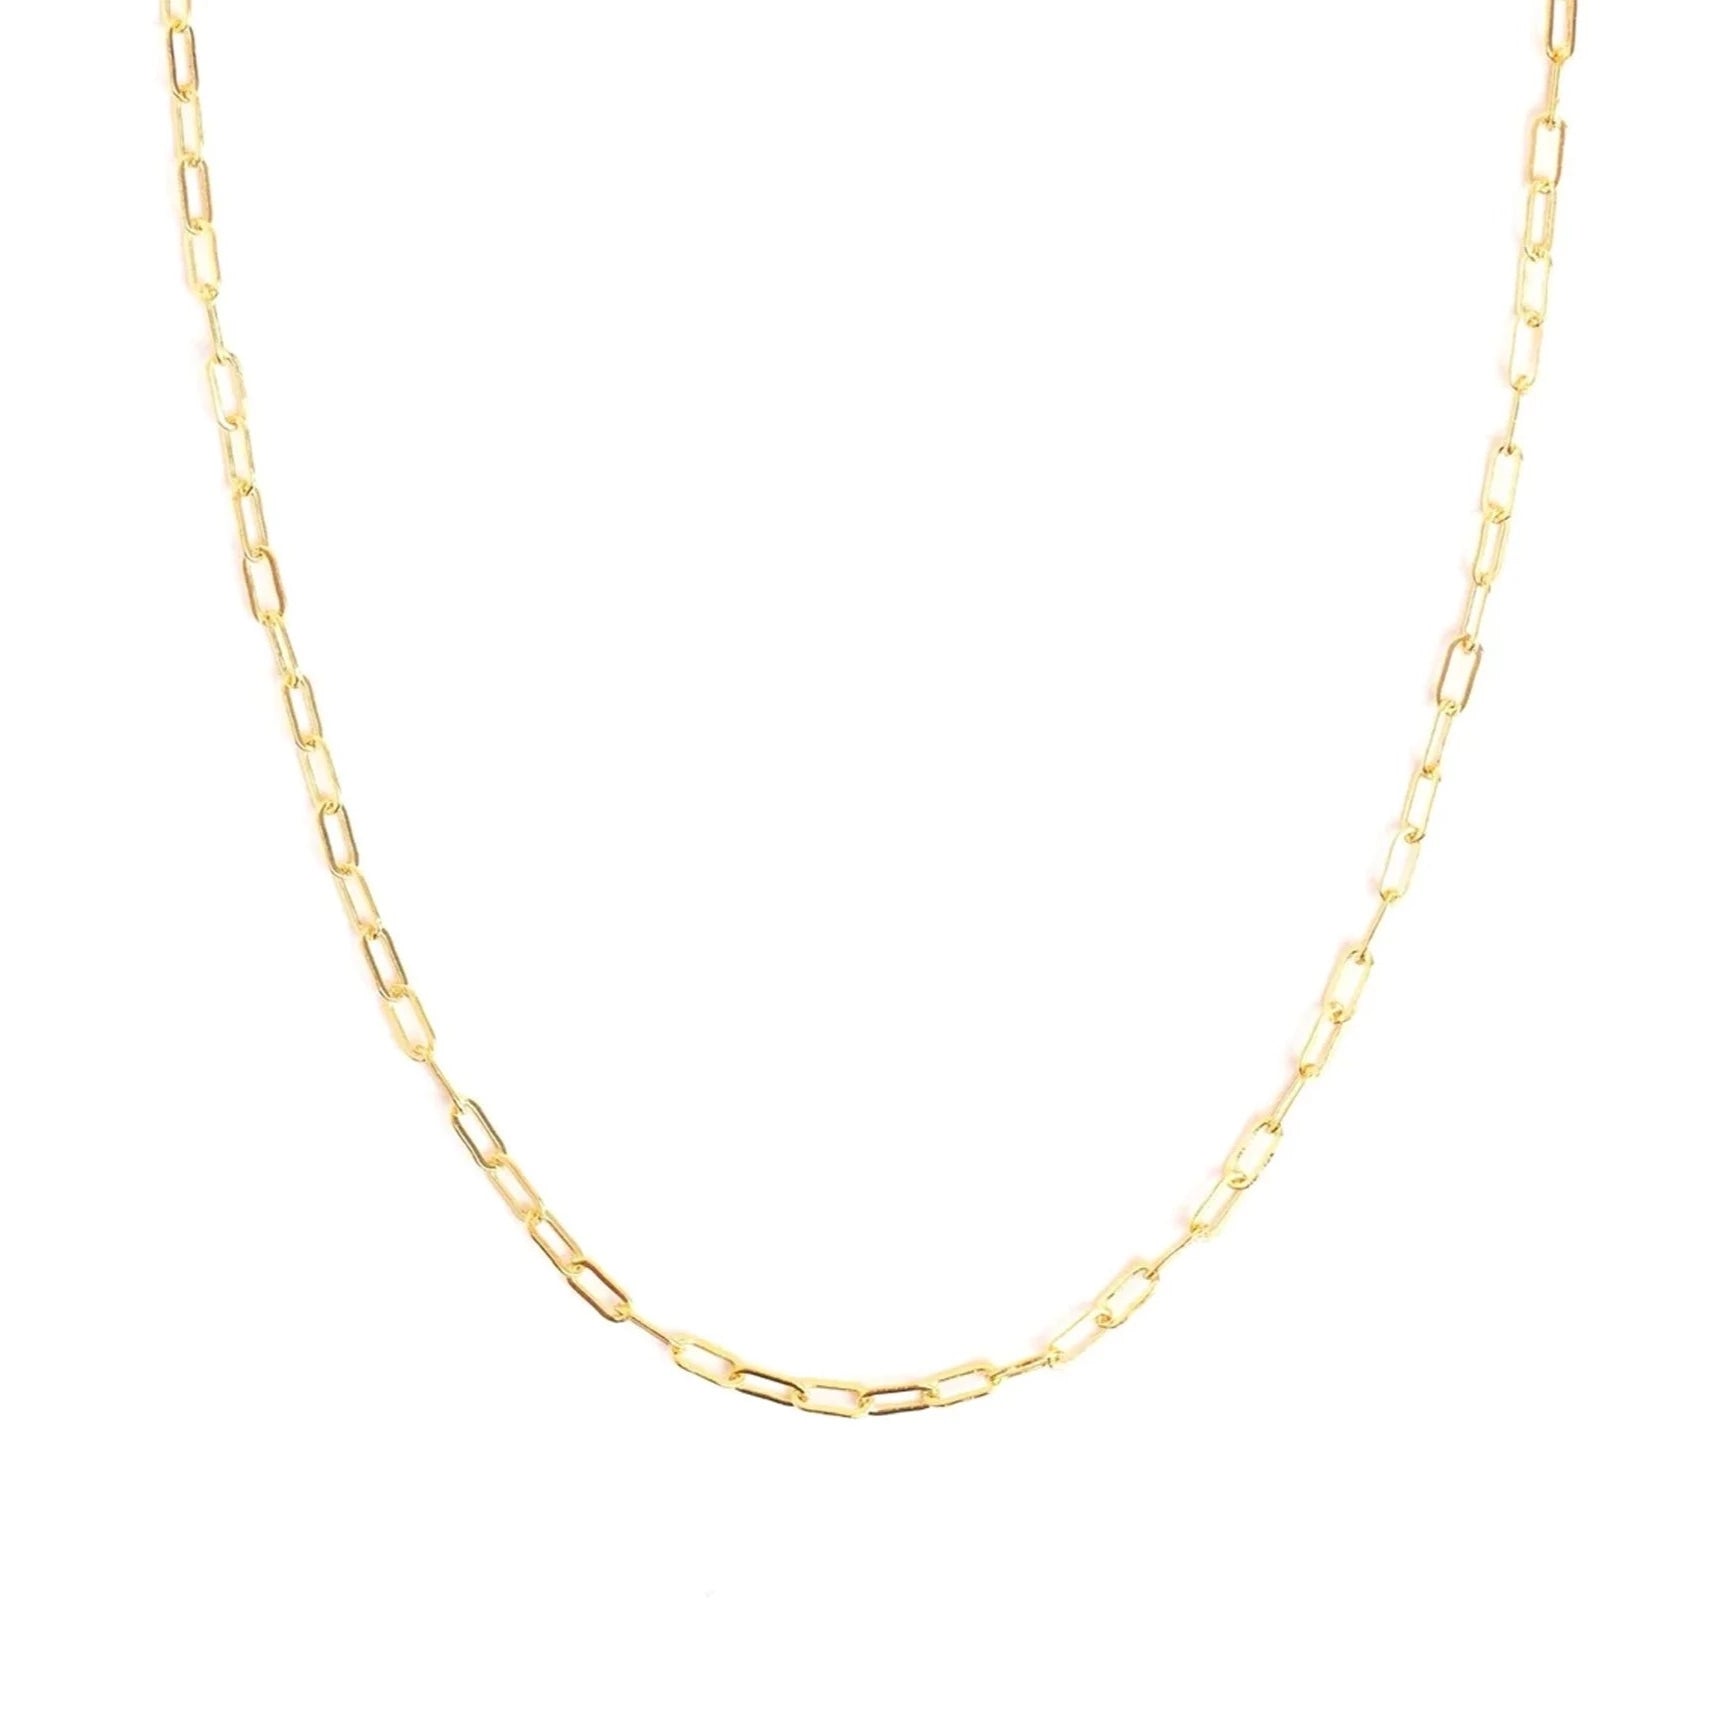 Cable Chain Choker - Handmade 14-karat Gold-Filled Necklace | Go Rings